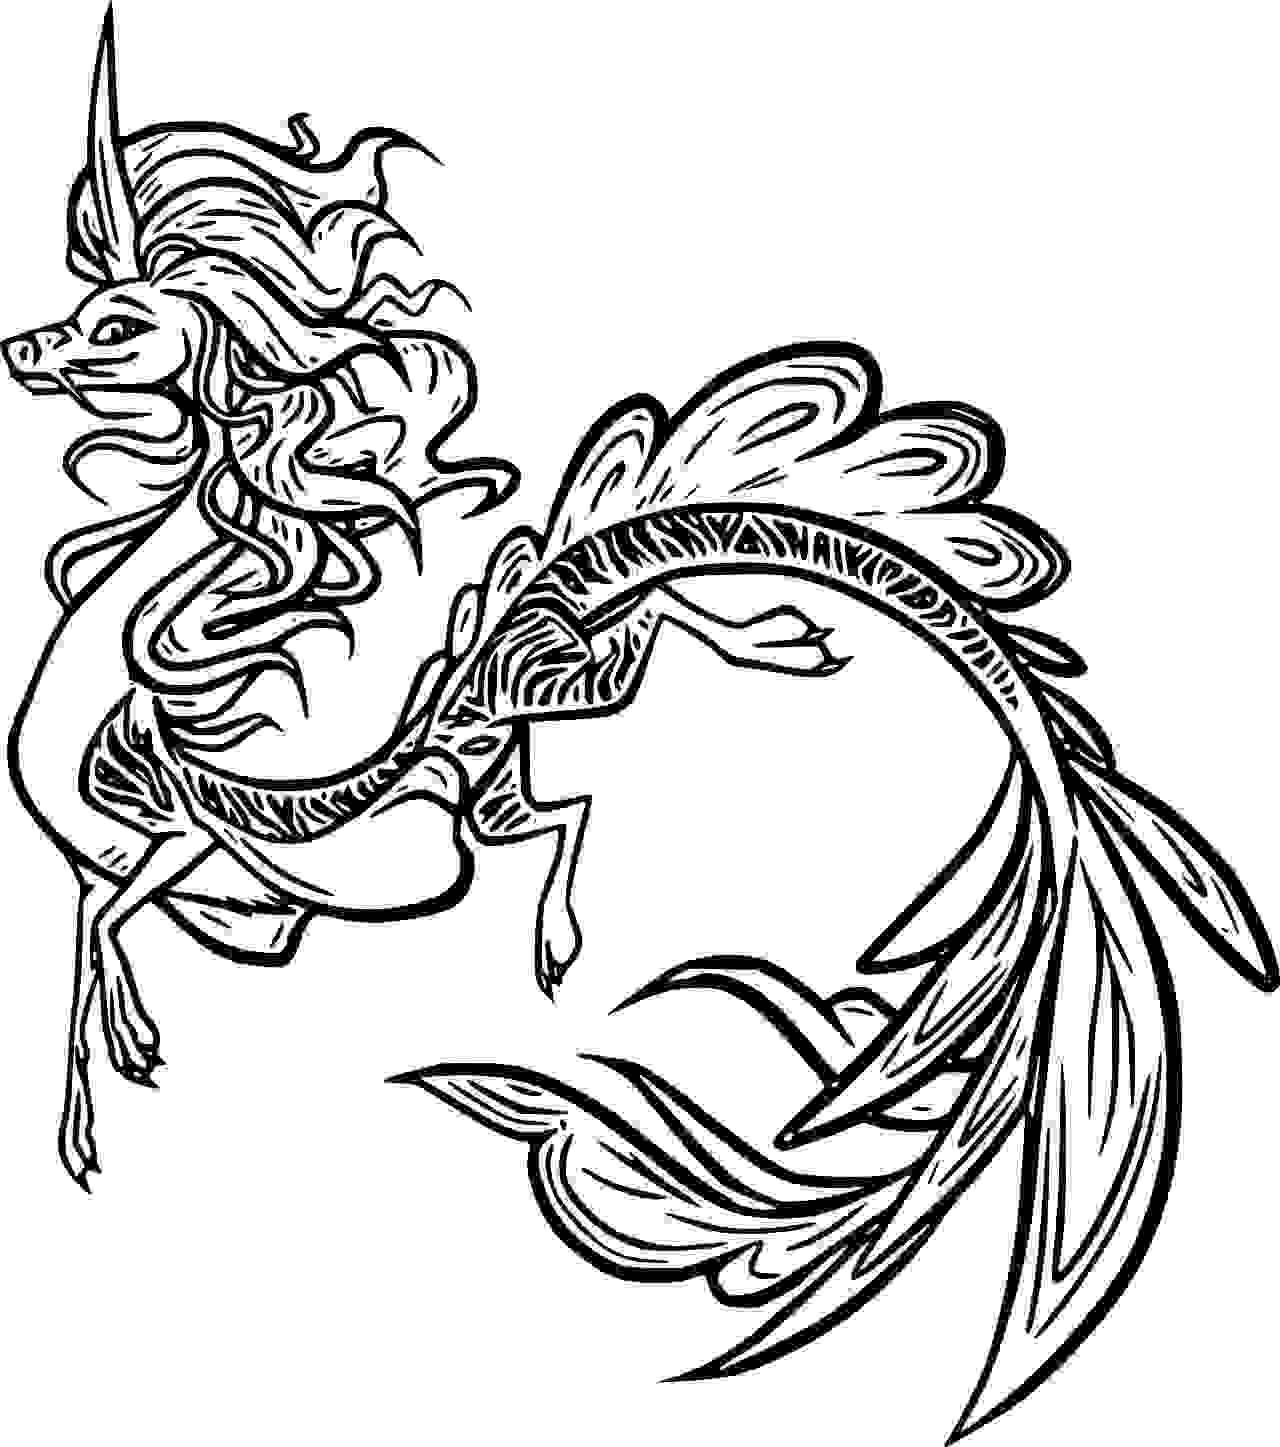 Dragon Coloring Pages for Adults Unique 3